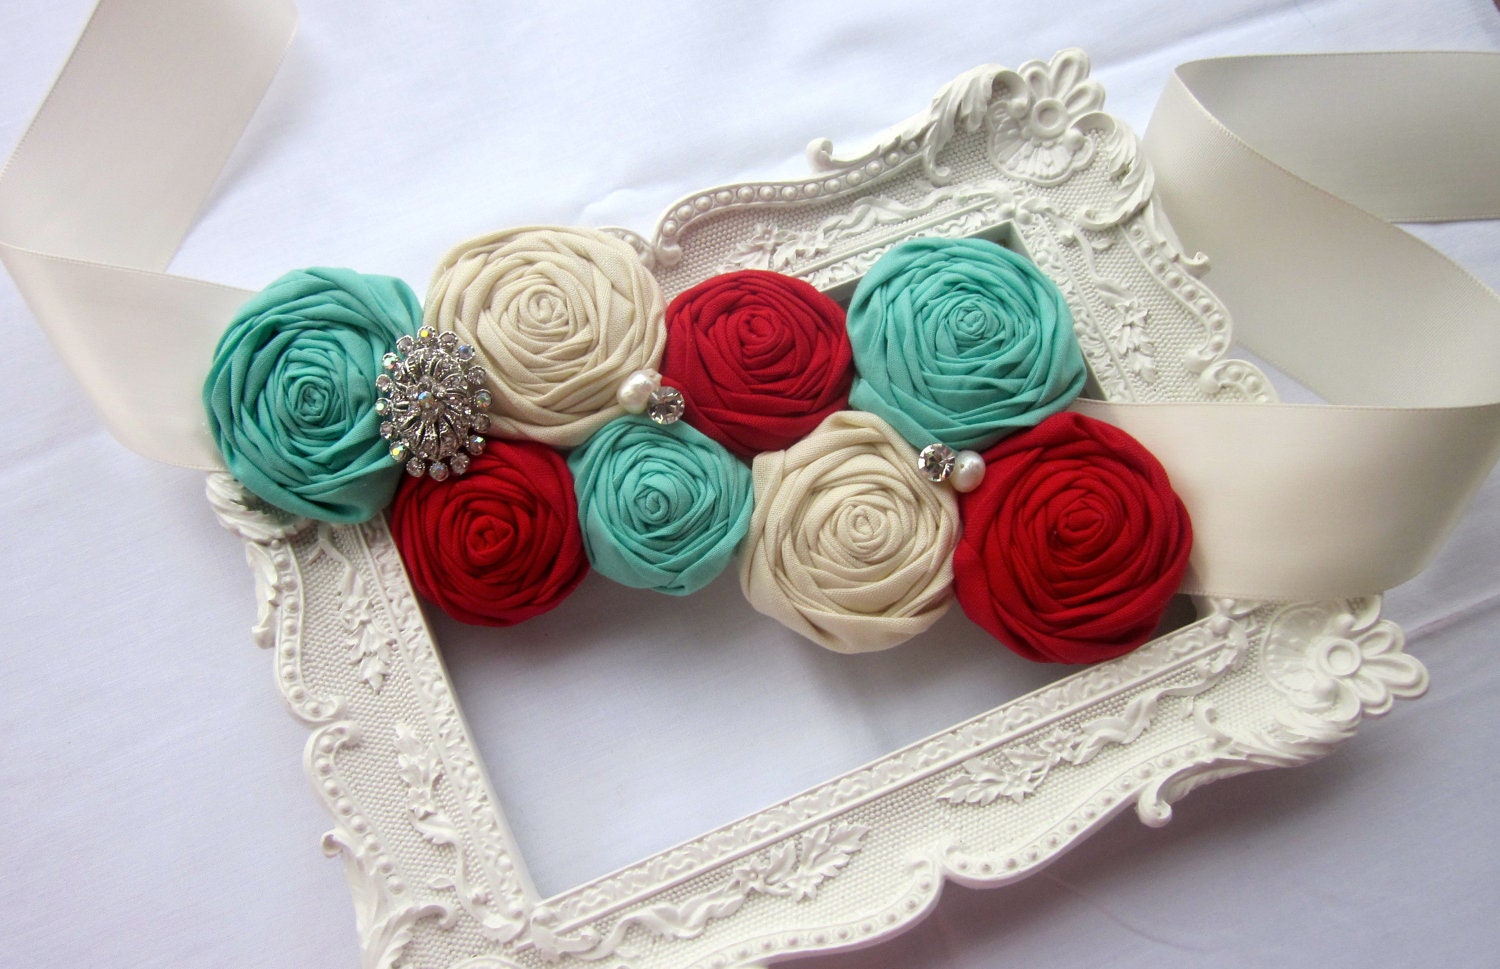 Rolled Rosette Sash for Bride, Bridesmaids, Flower Girls, or Maternity Shoots in Red, Tiffany Blue, and Ivory